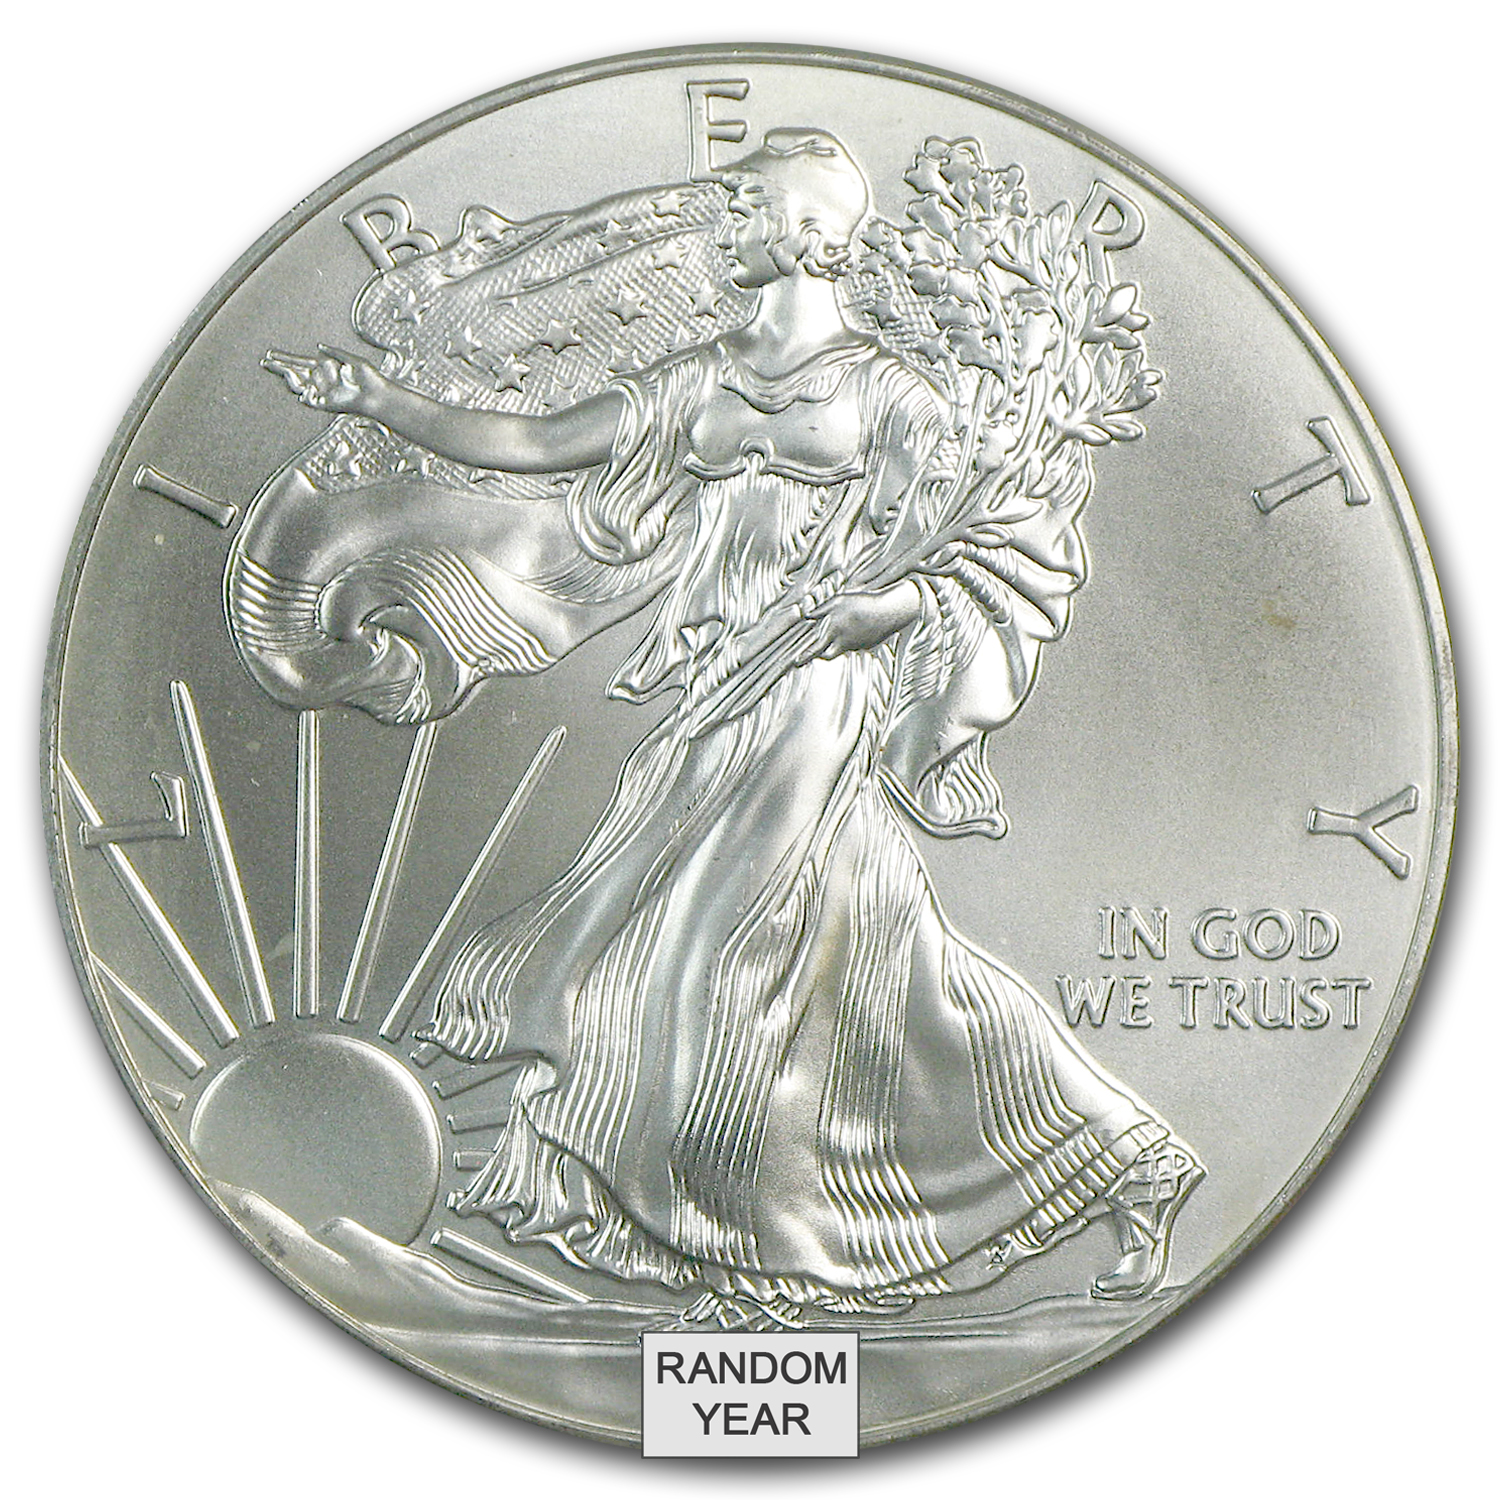 Buy 1 oz American Silver Eagle (Cull, Damaged, etc.) - Click Image to Close